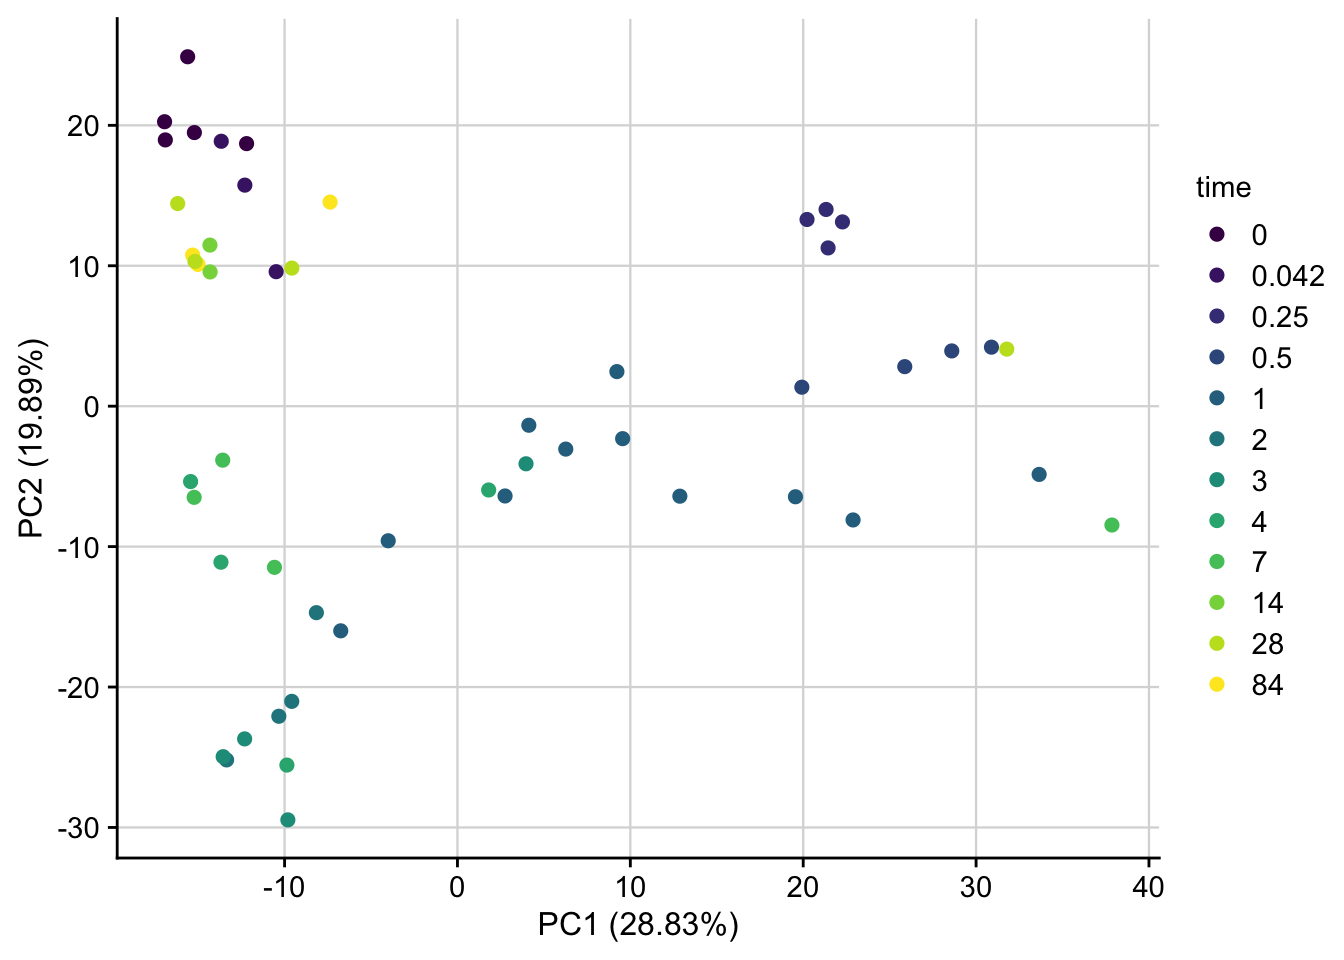 pca-norm-data-1.png